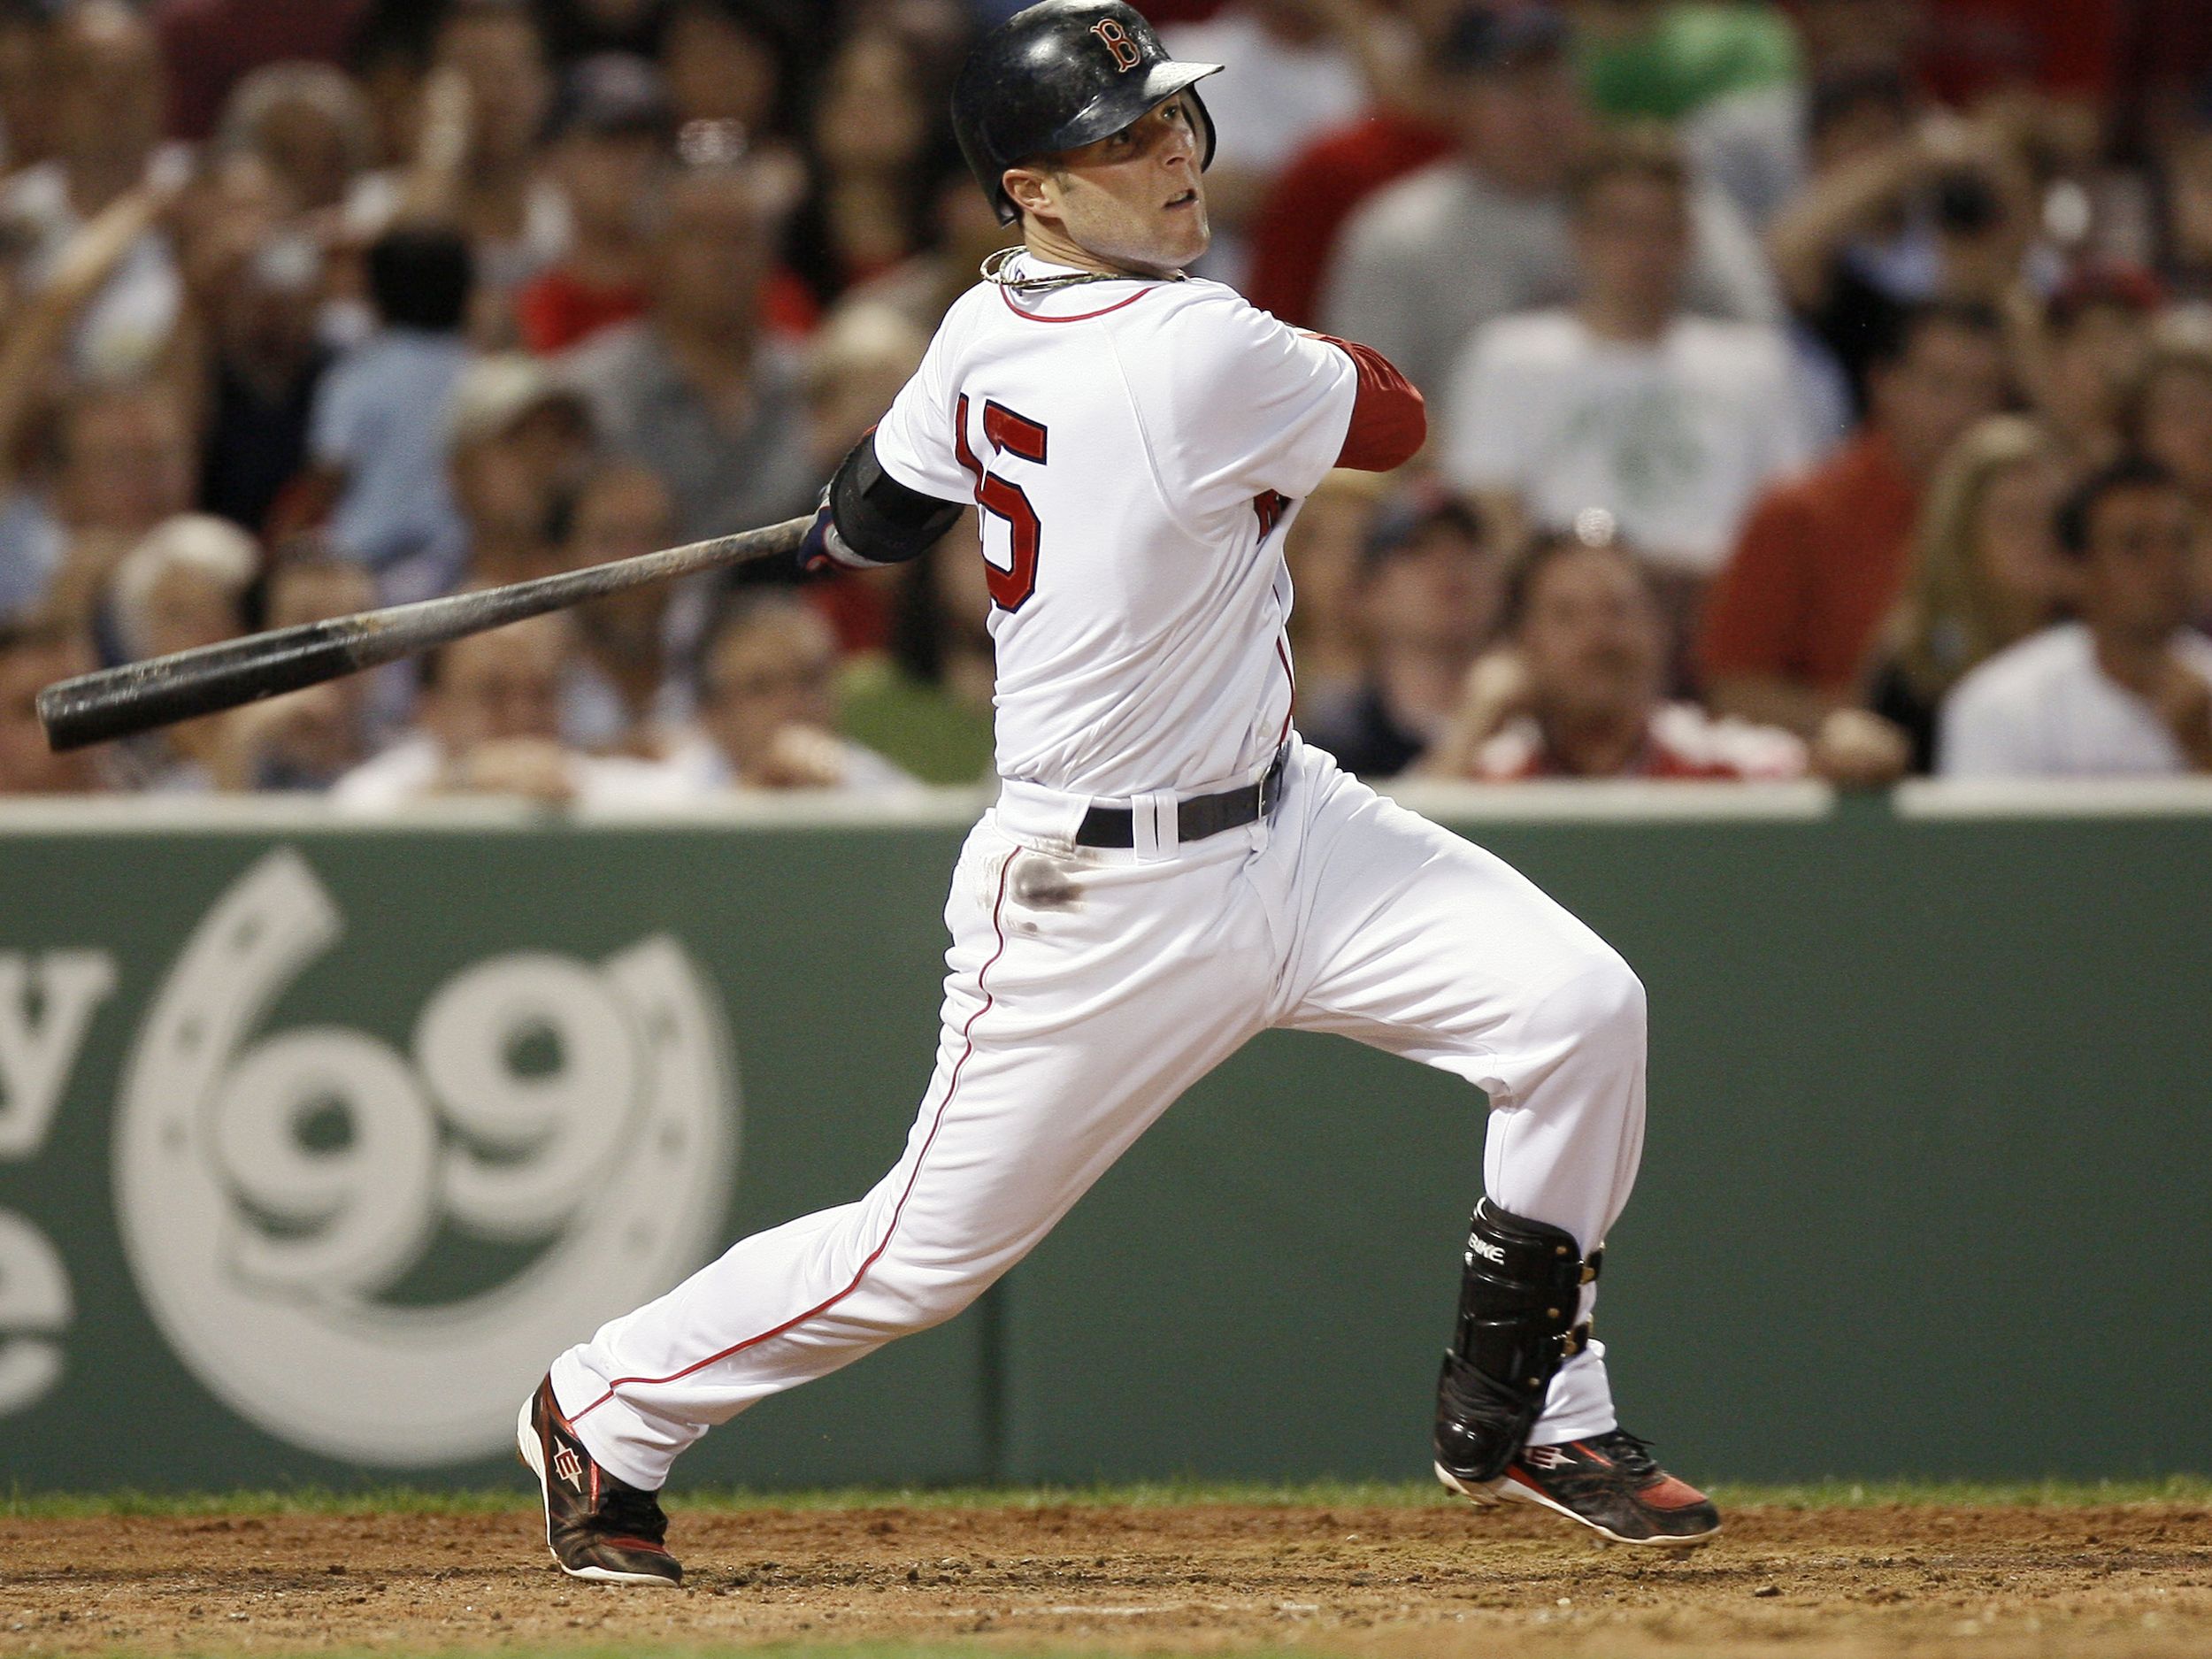 Interview: The Red Sox Dustin Pedroia On High School Sports 